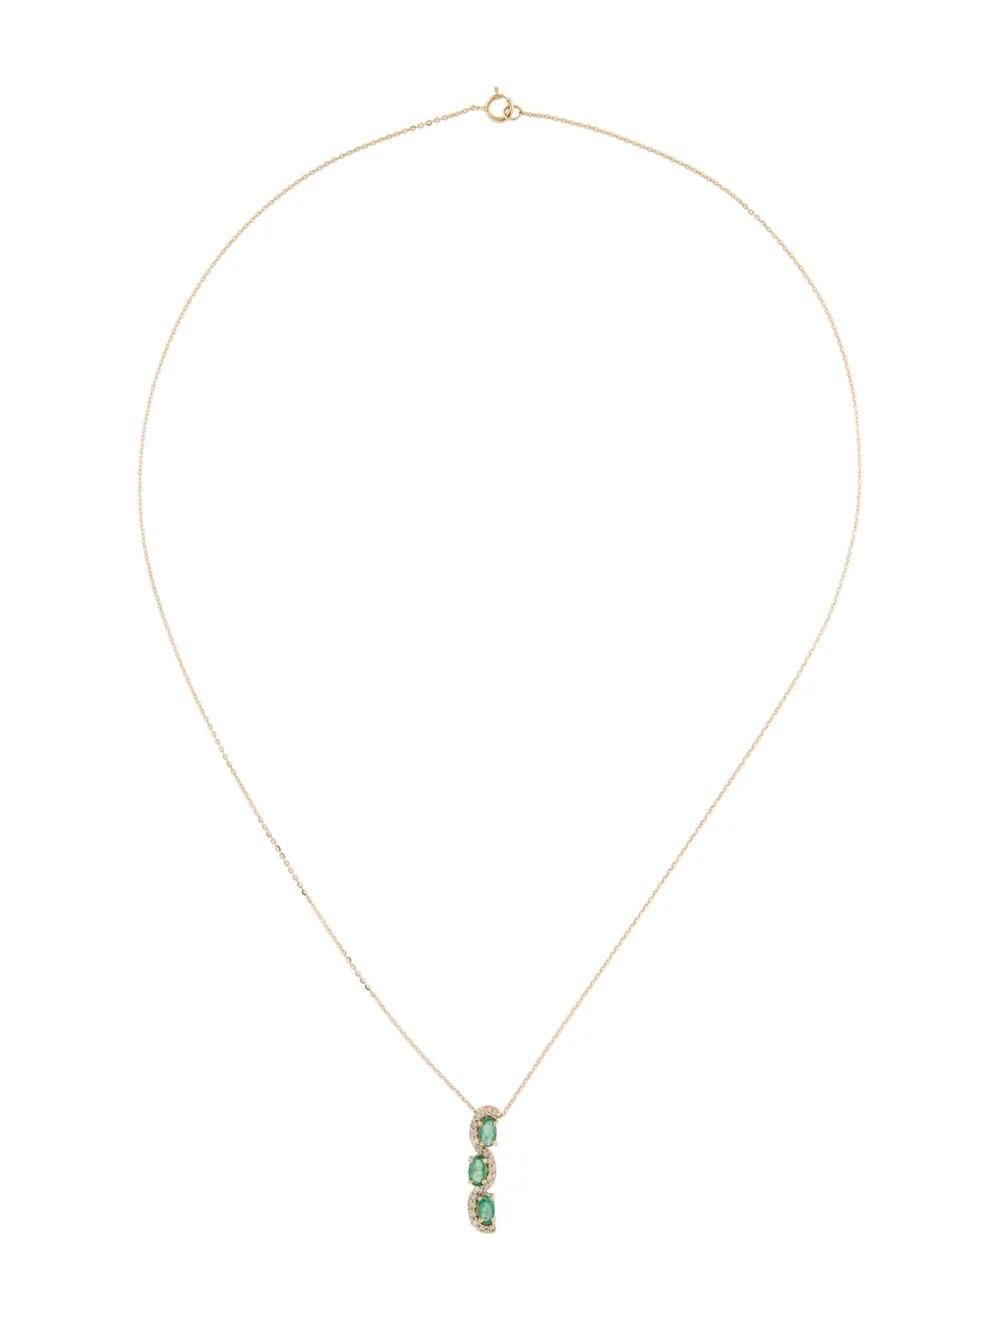 14K Emerald Diamond Pendant Necklace - Timeless & Elegant Statement Jewelry In New Condition For Sale In Holtsville, NY